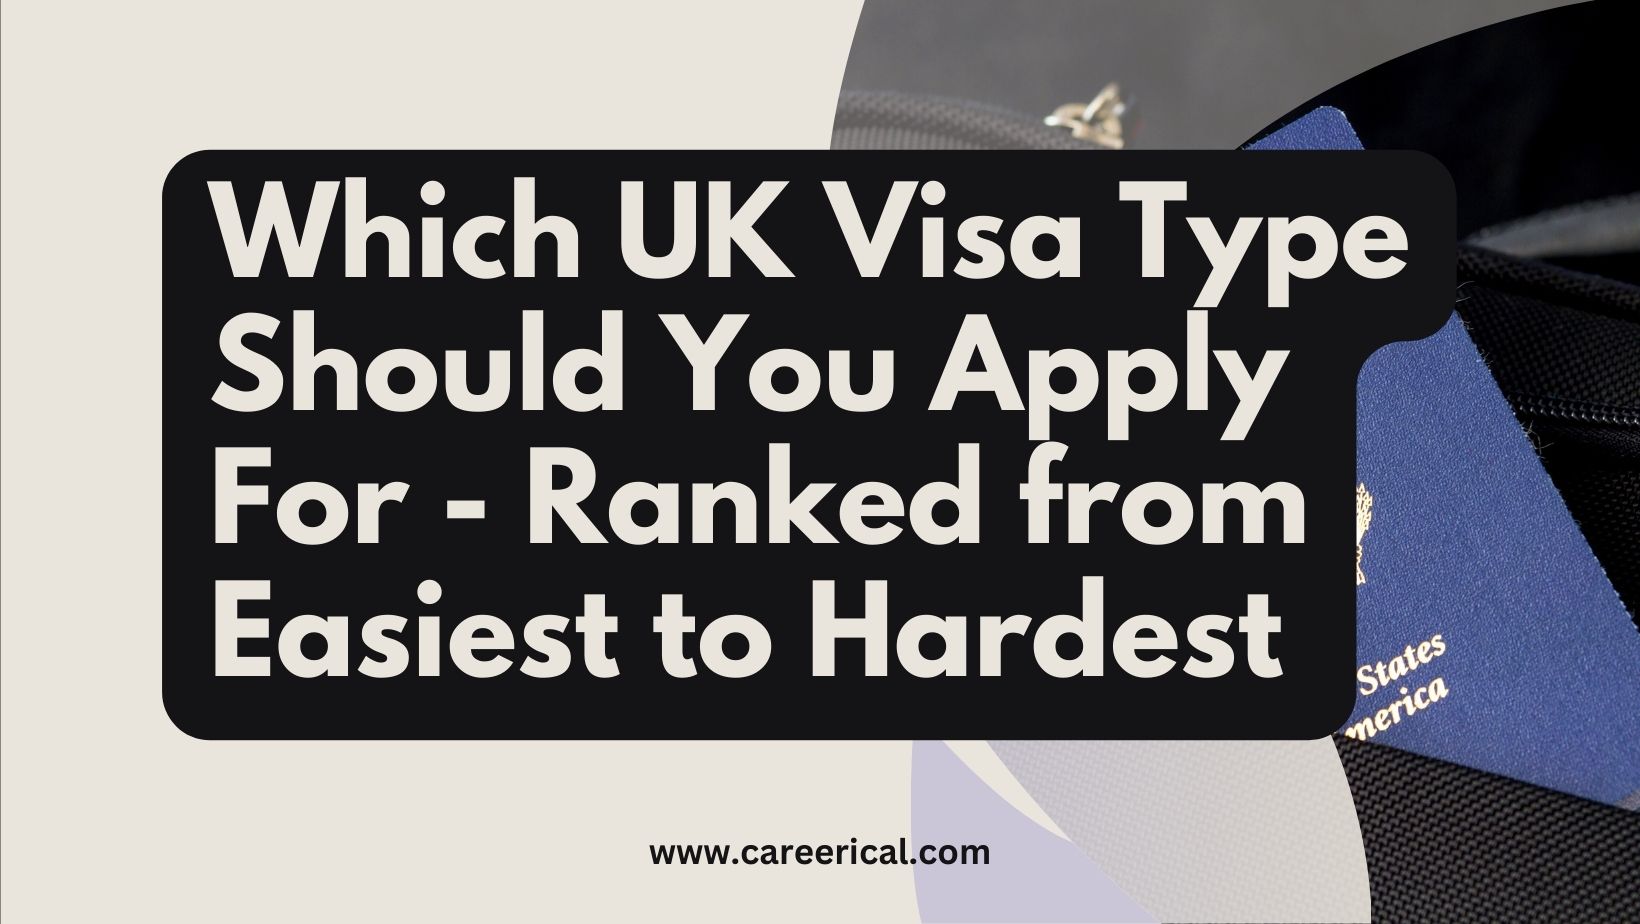 Which UK Visa Type Should You Apply For - Ranked from Easiest to Hardest